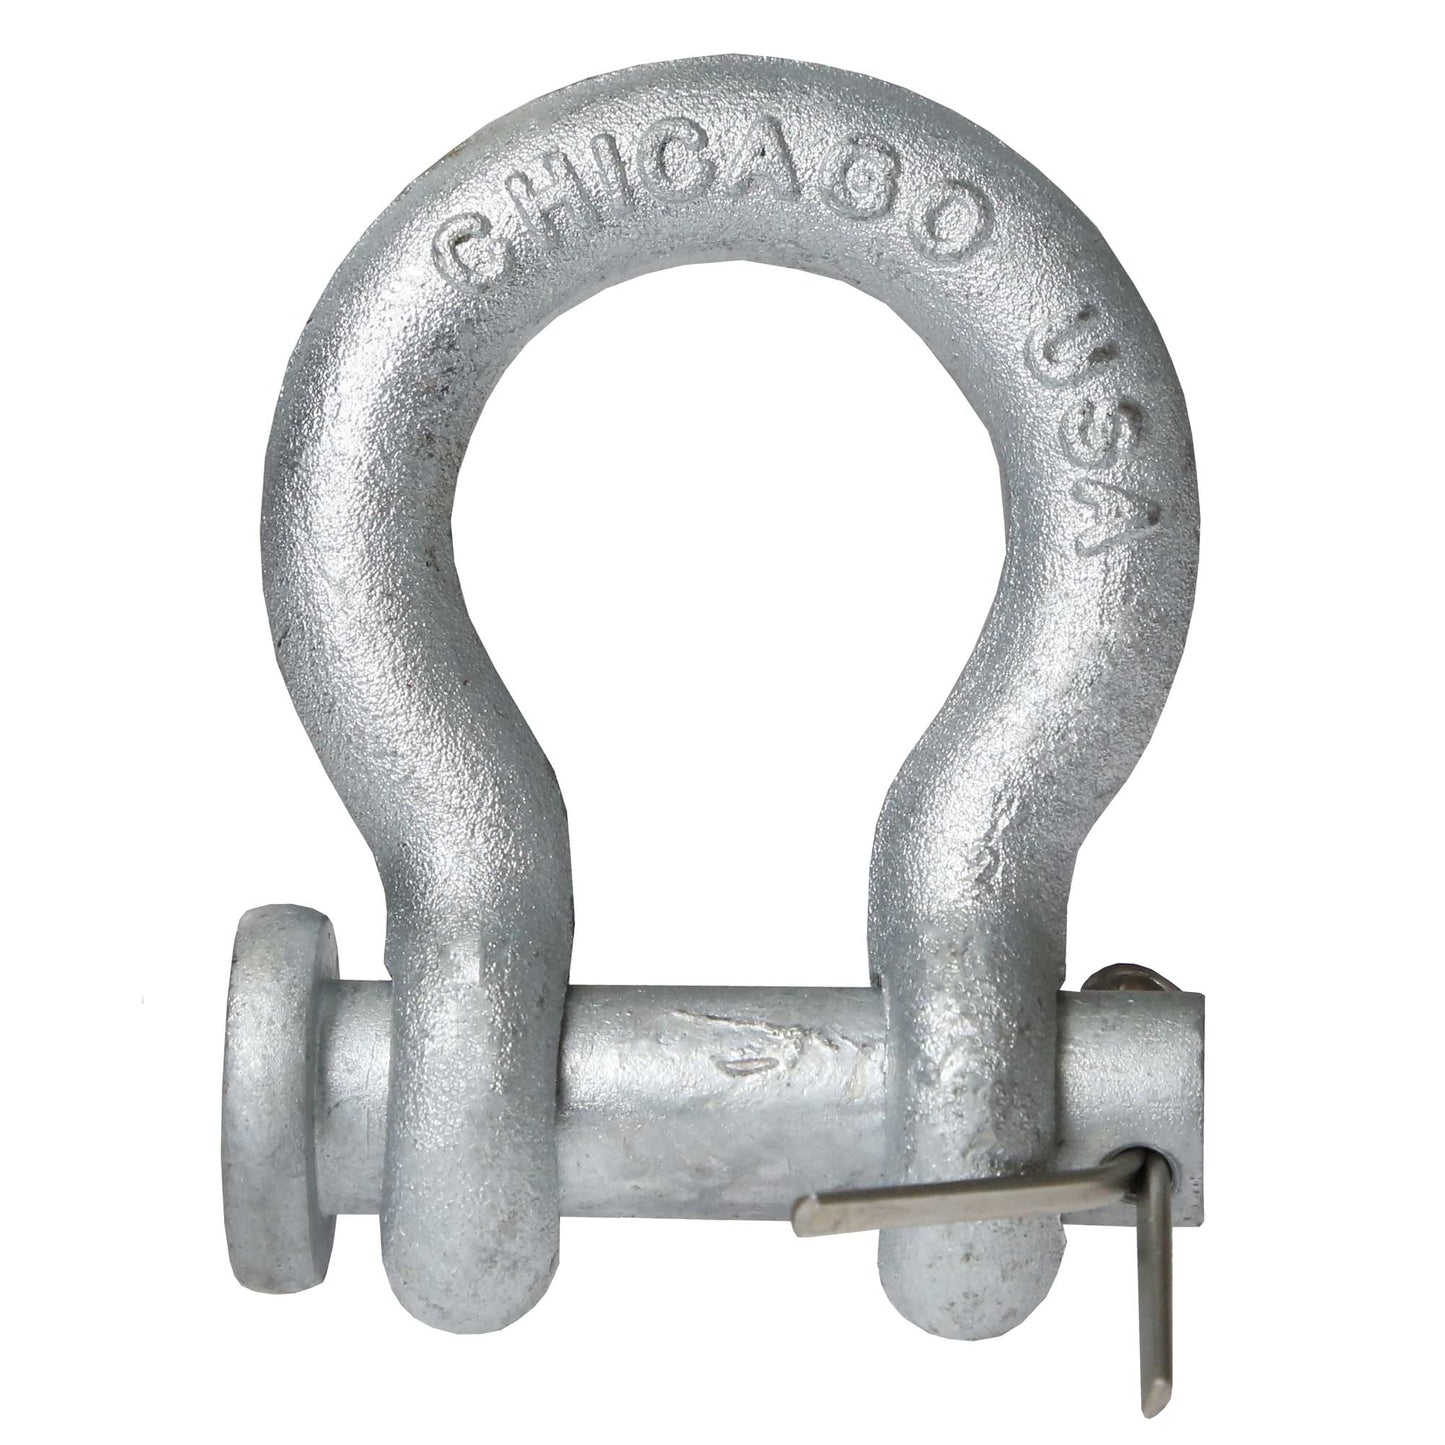 Anchor Shackle - Chicago Hardware - Round Pin - 1-3/8" Galvanized Steel - 13.5 Ton primary image